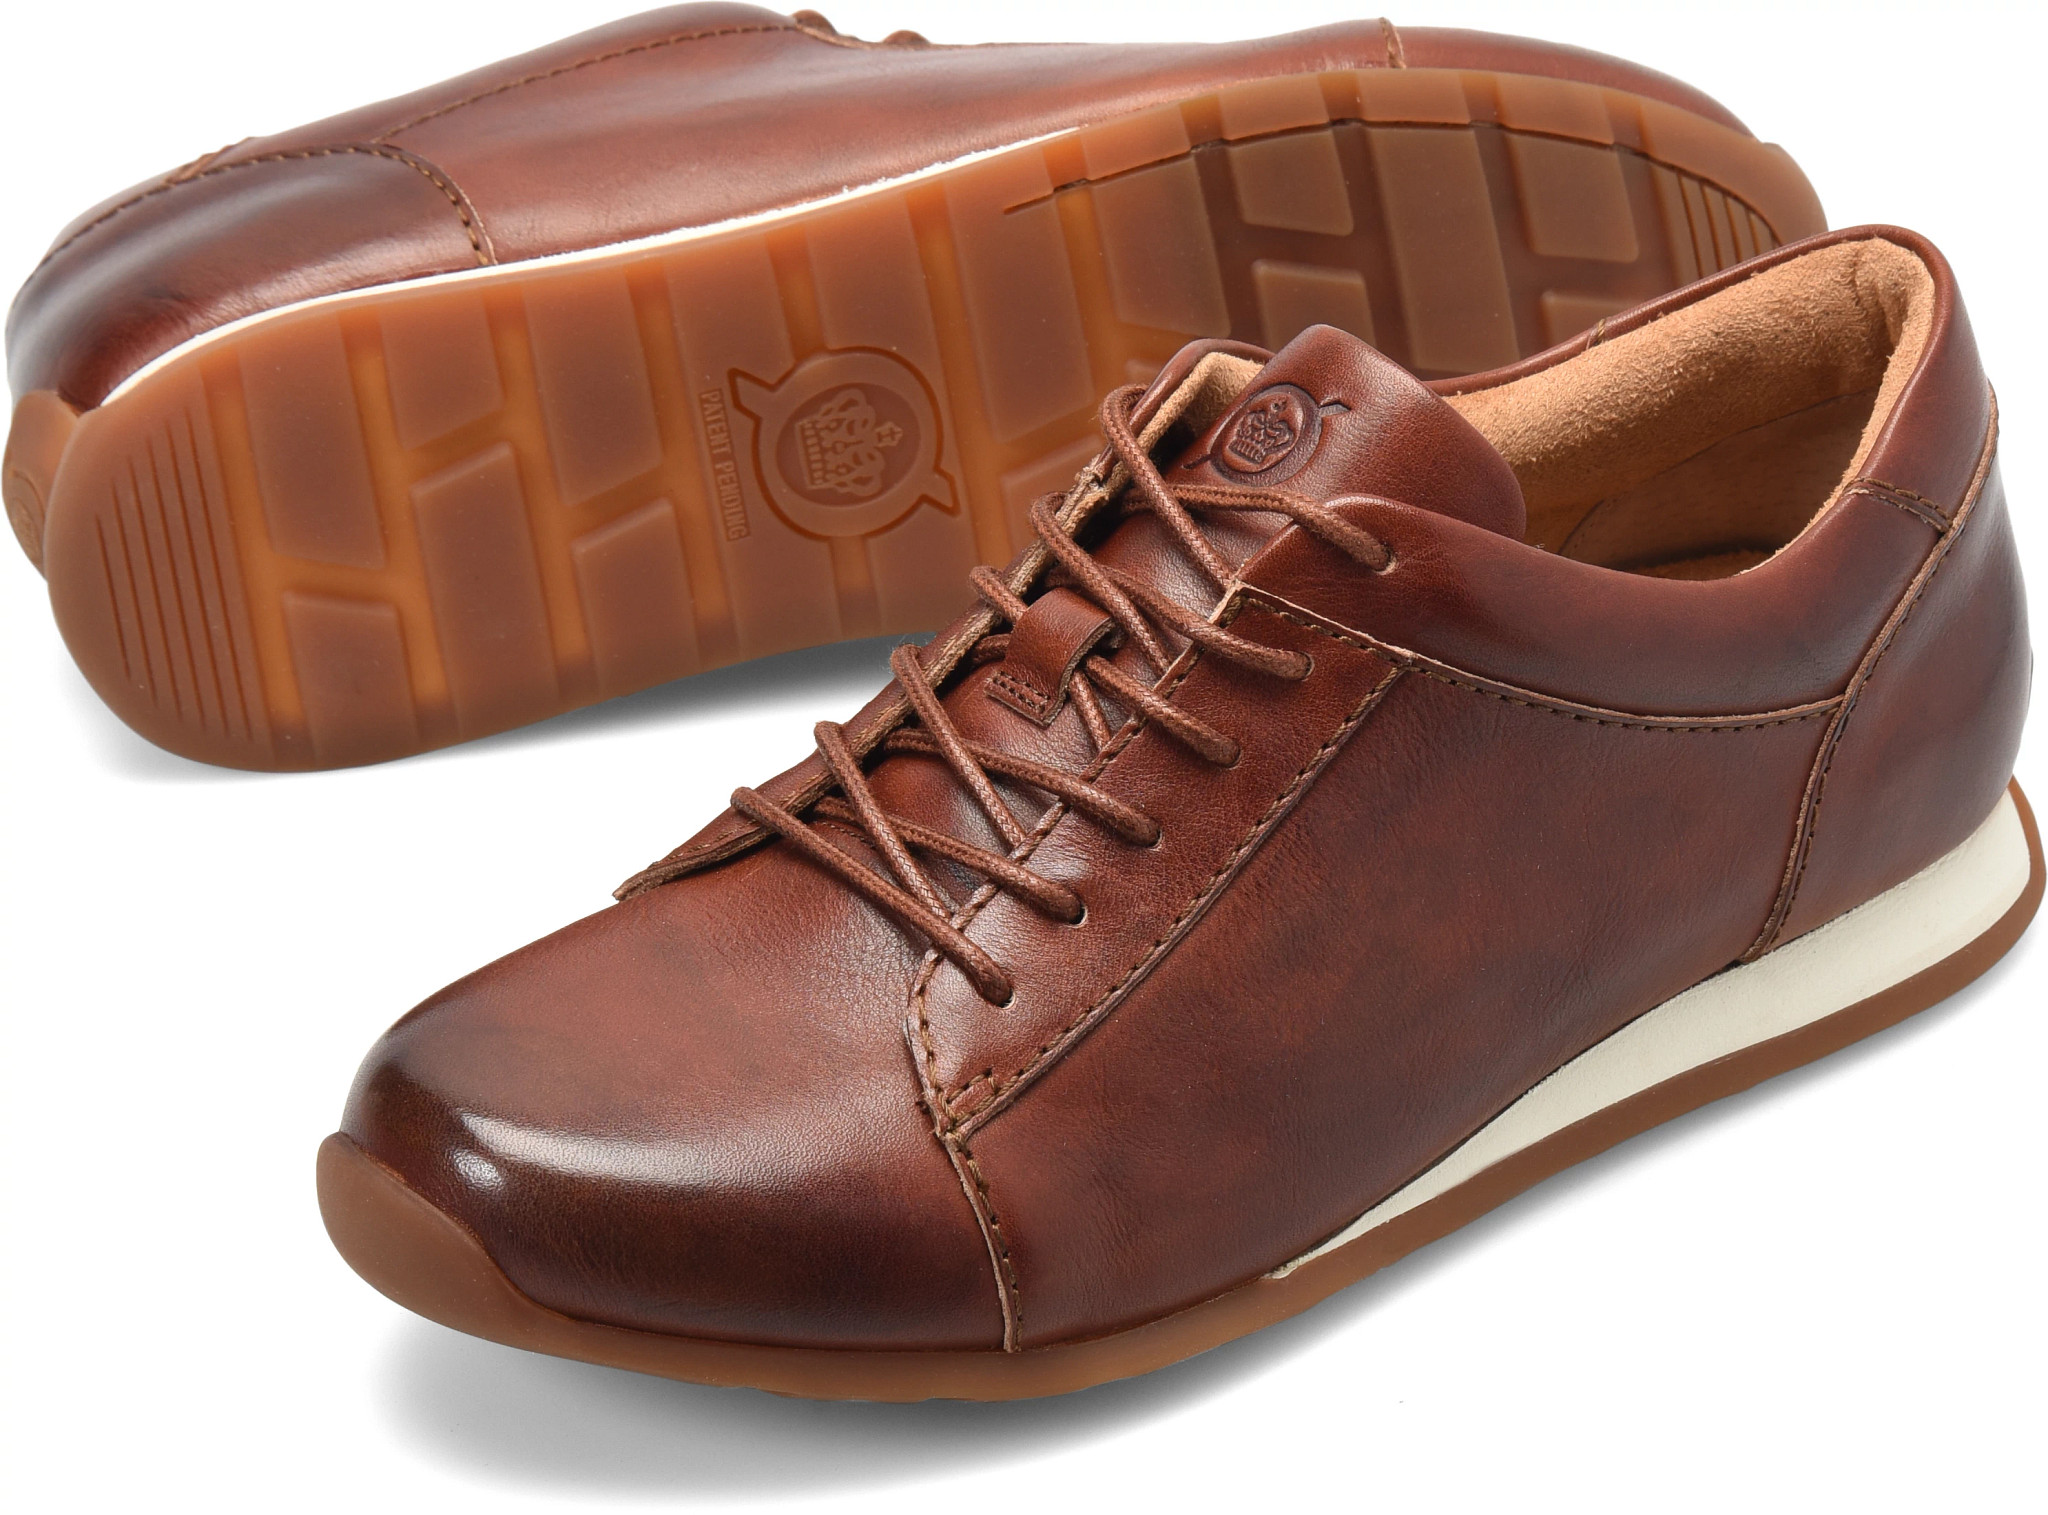 Moma Leather Lace-up Shoes in Dark Brown Brown Mens Shoes Lace-ups Oxford shoes for Men 